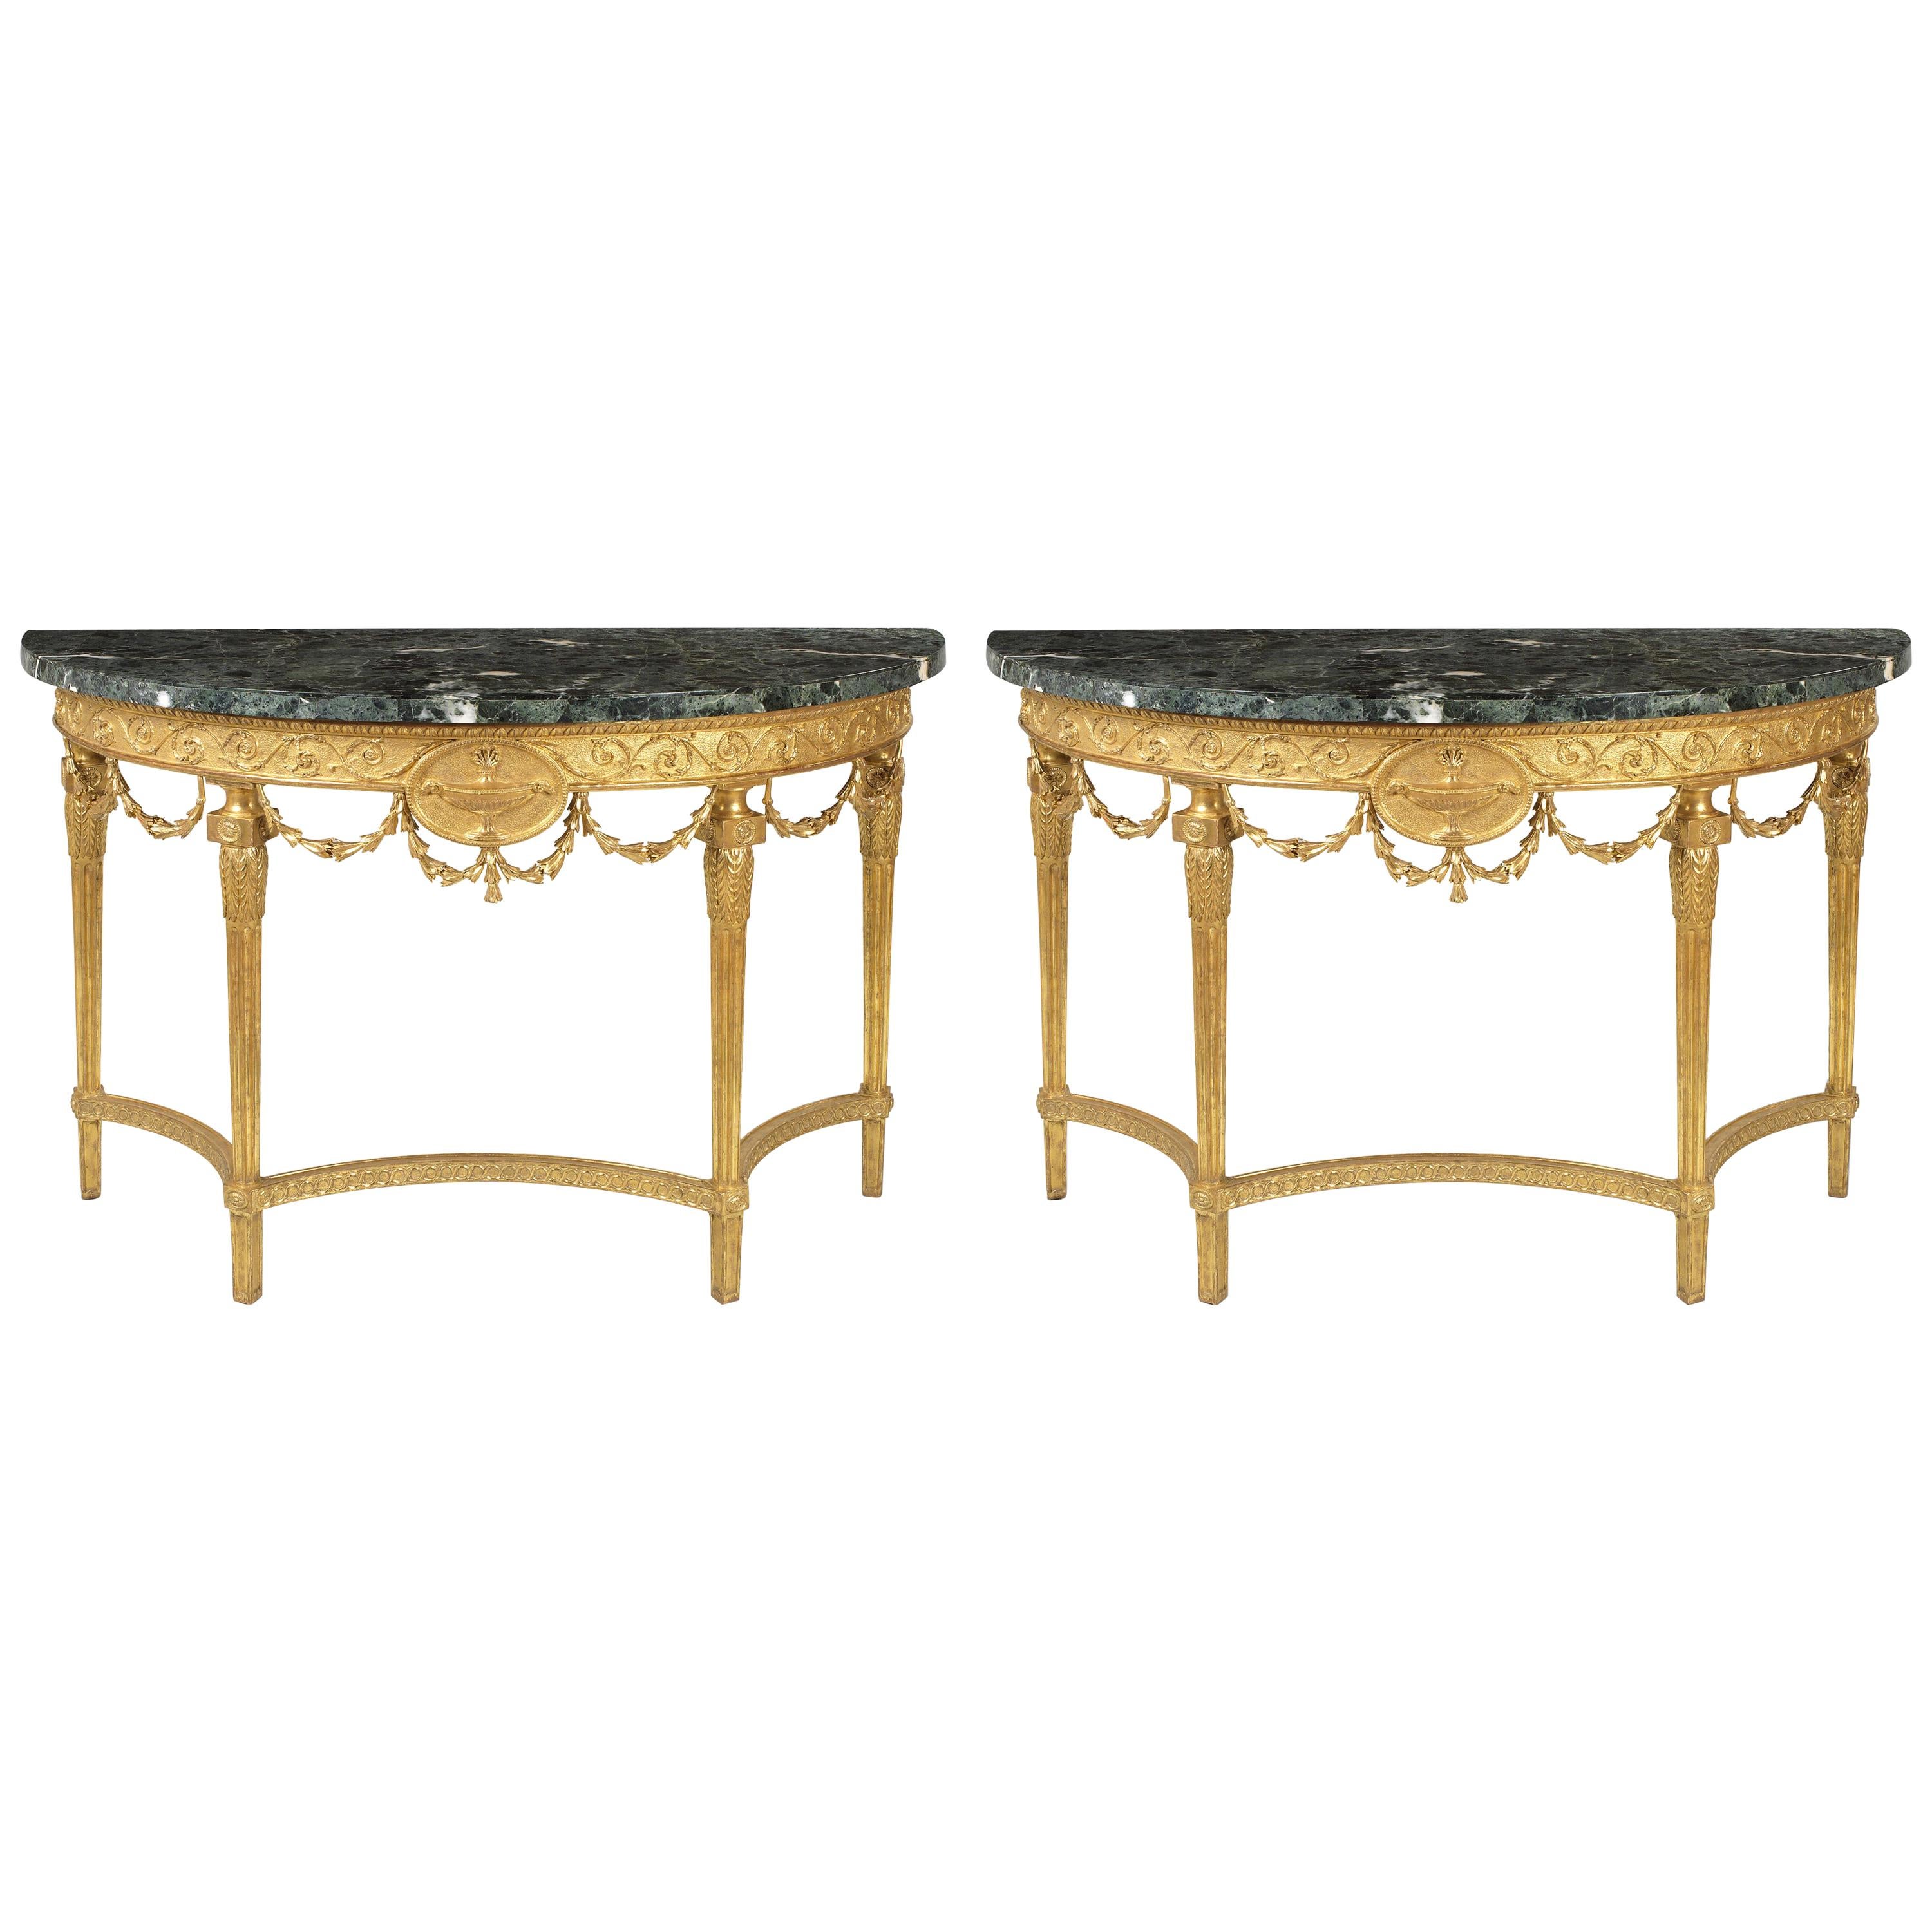 Fine Pair of George III Giltwood Marble Demilune Pier Tables For Sale